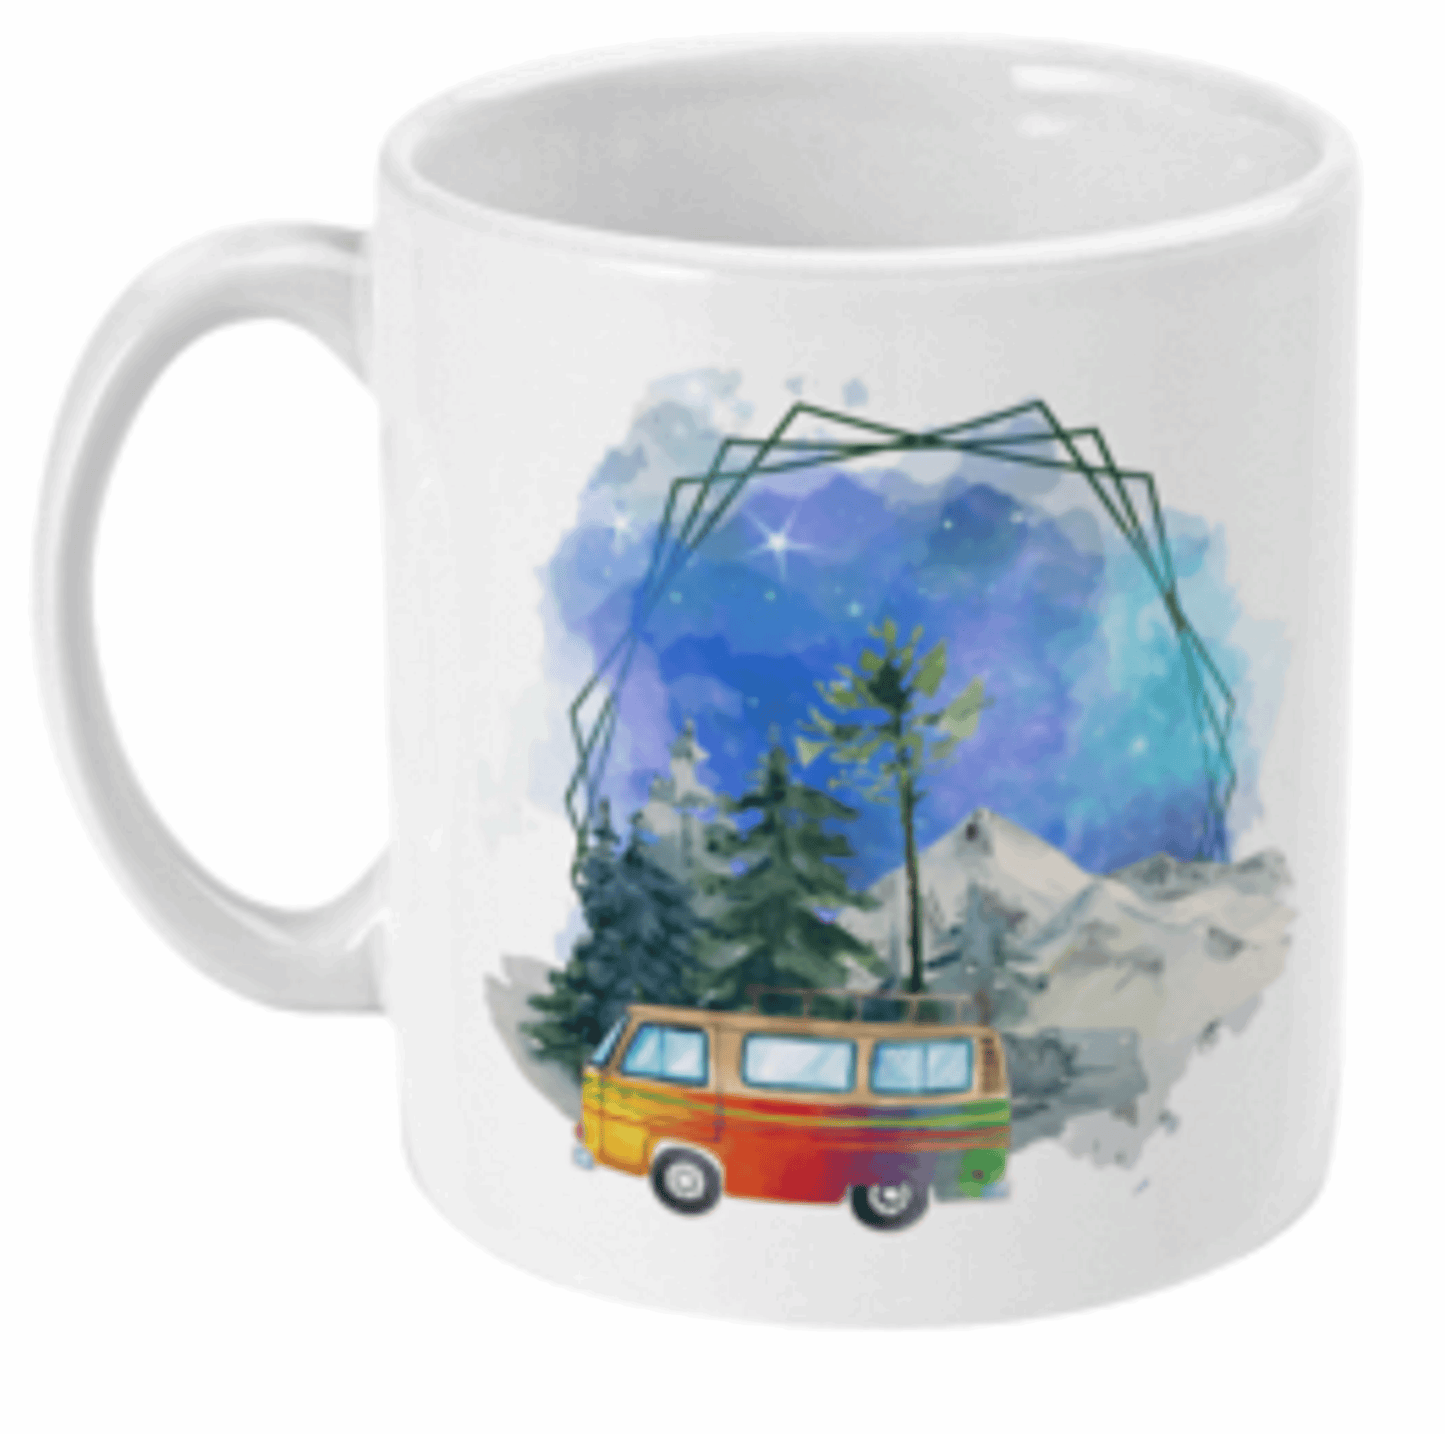  Water Colour Camping Camper Van Coffee Mug by Free Spirit Accessories sold by Free Spirit Accessories